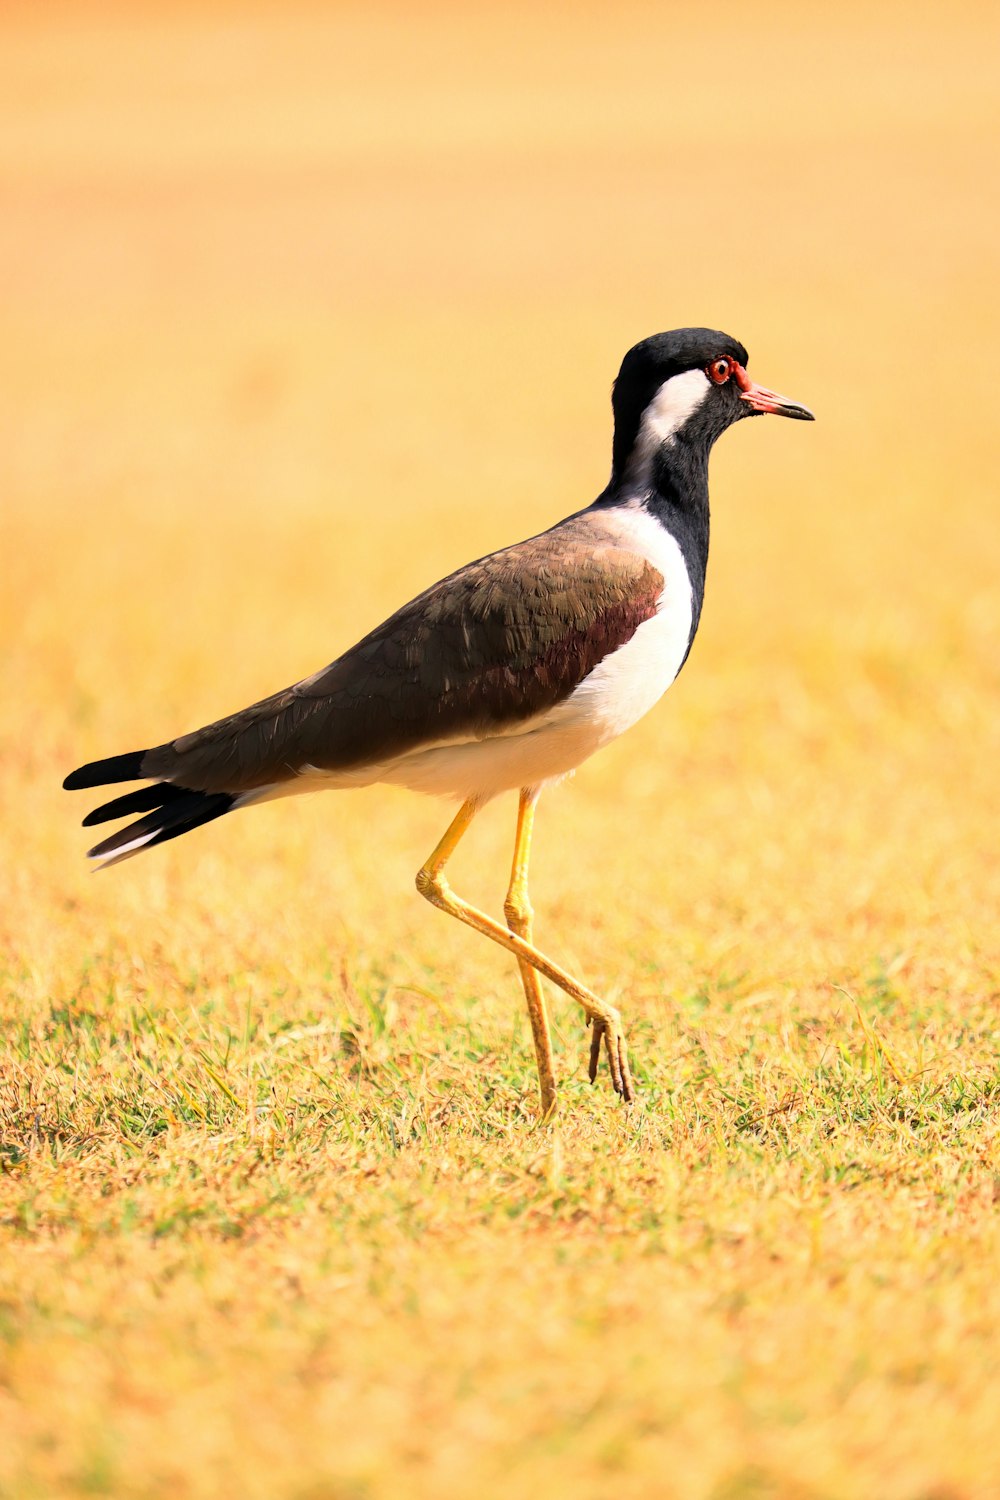 a black and white bird walking across a grass covered field